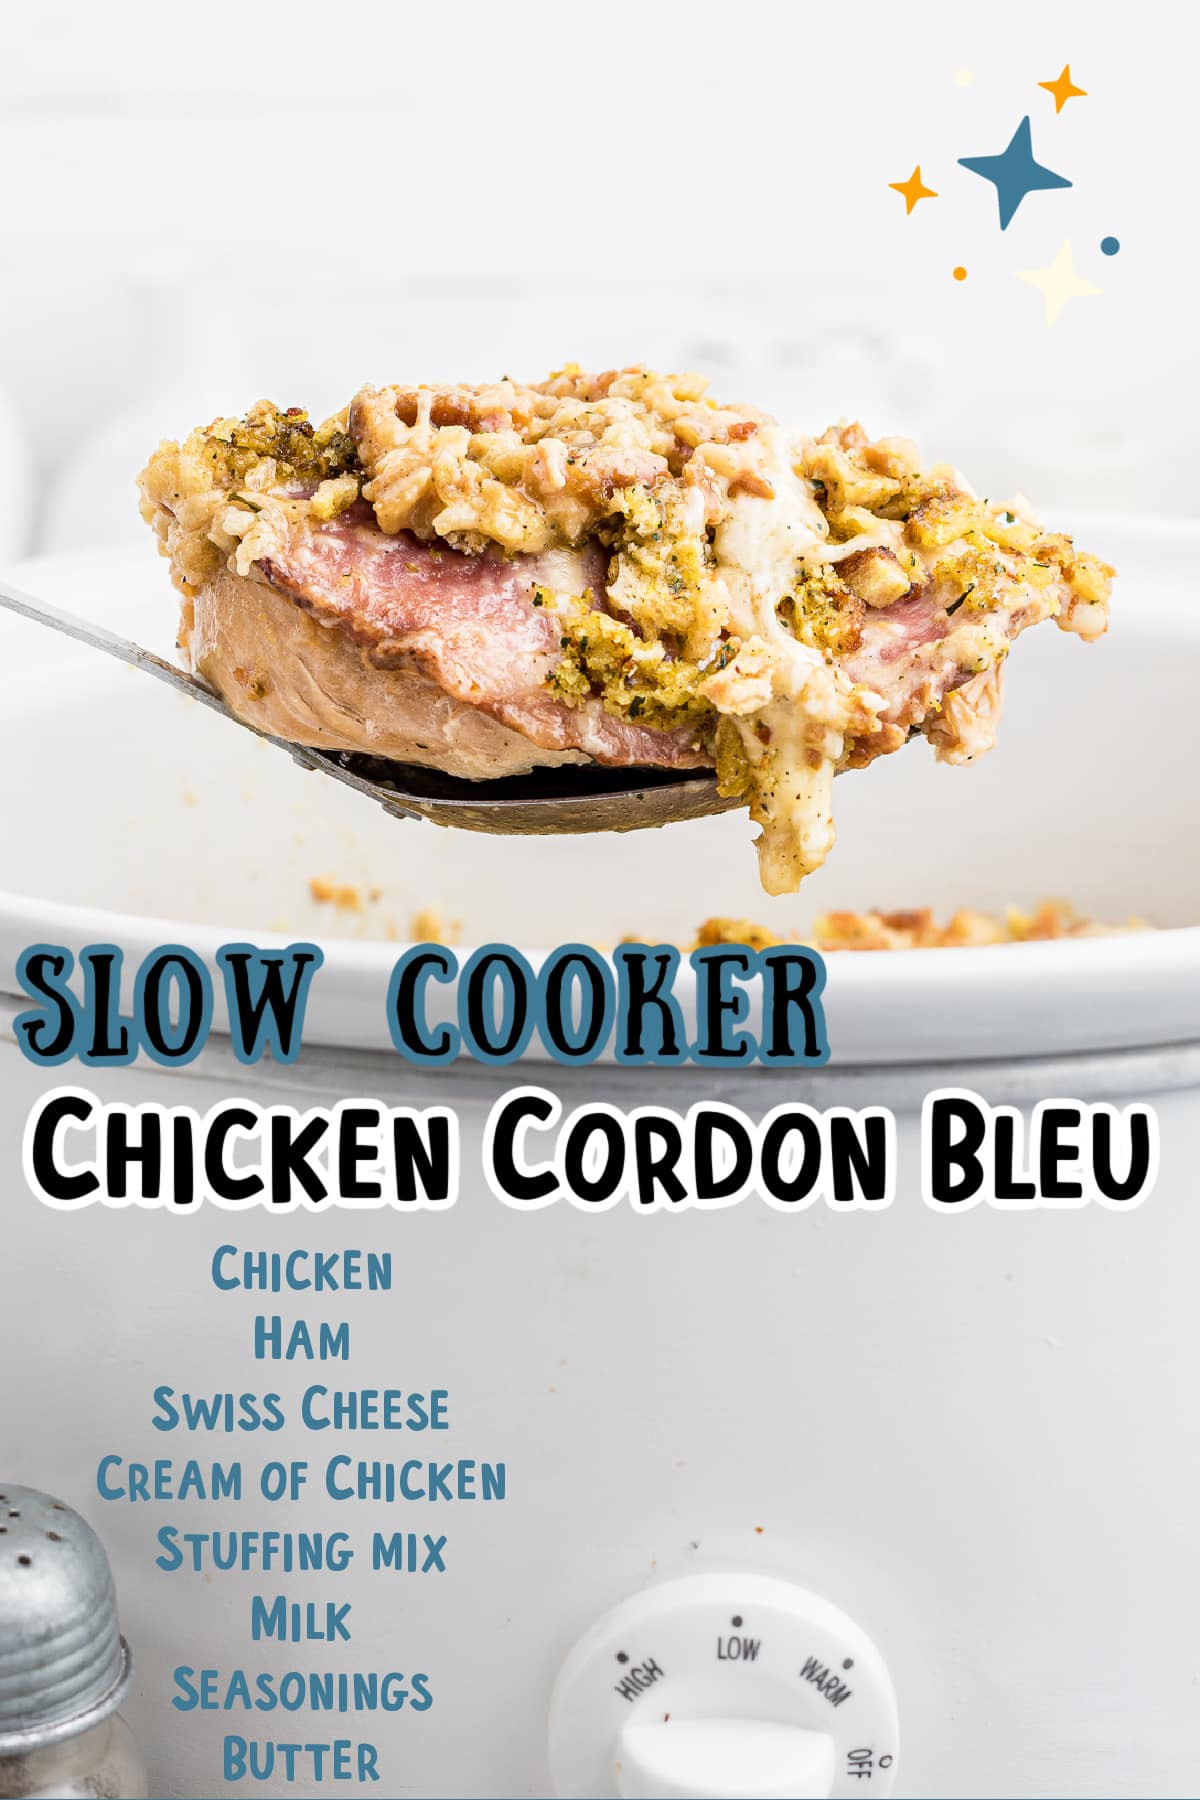 chicken cordon blue image with text of what the ingredients are.